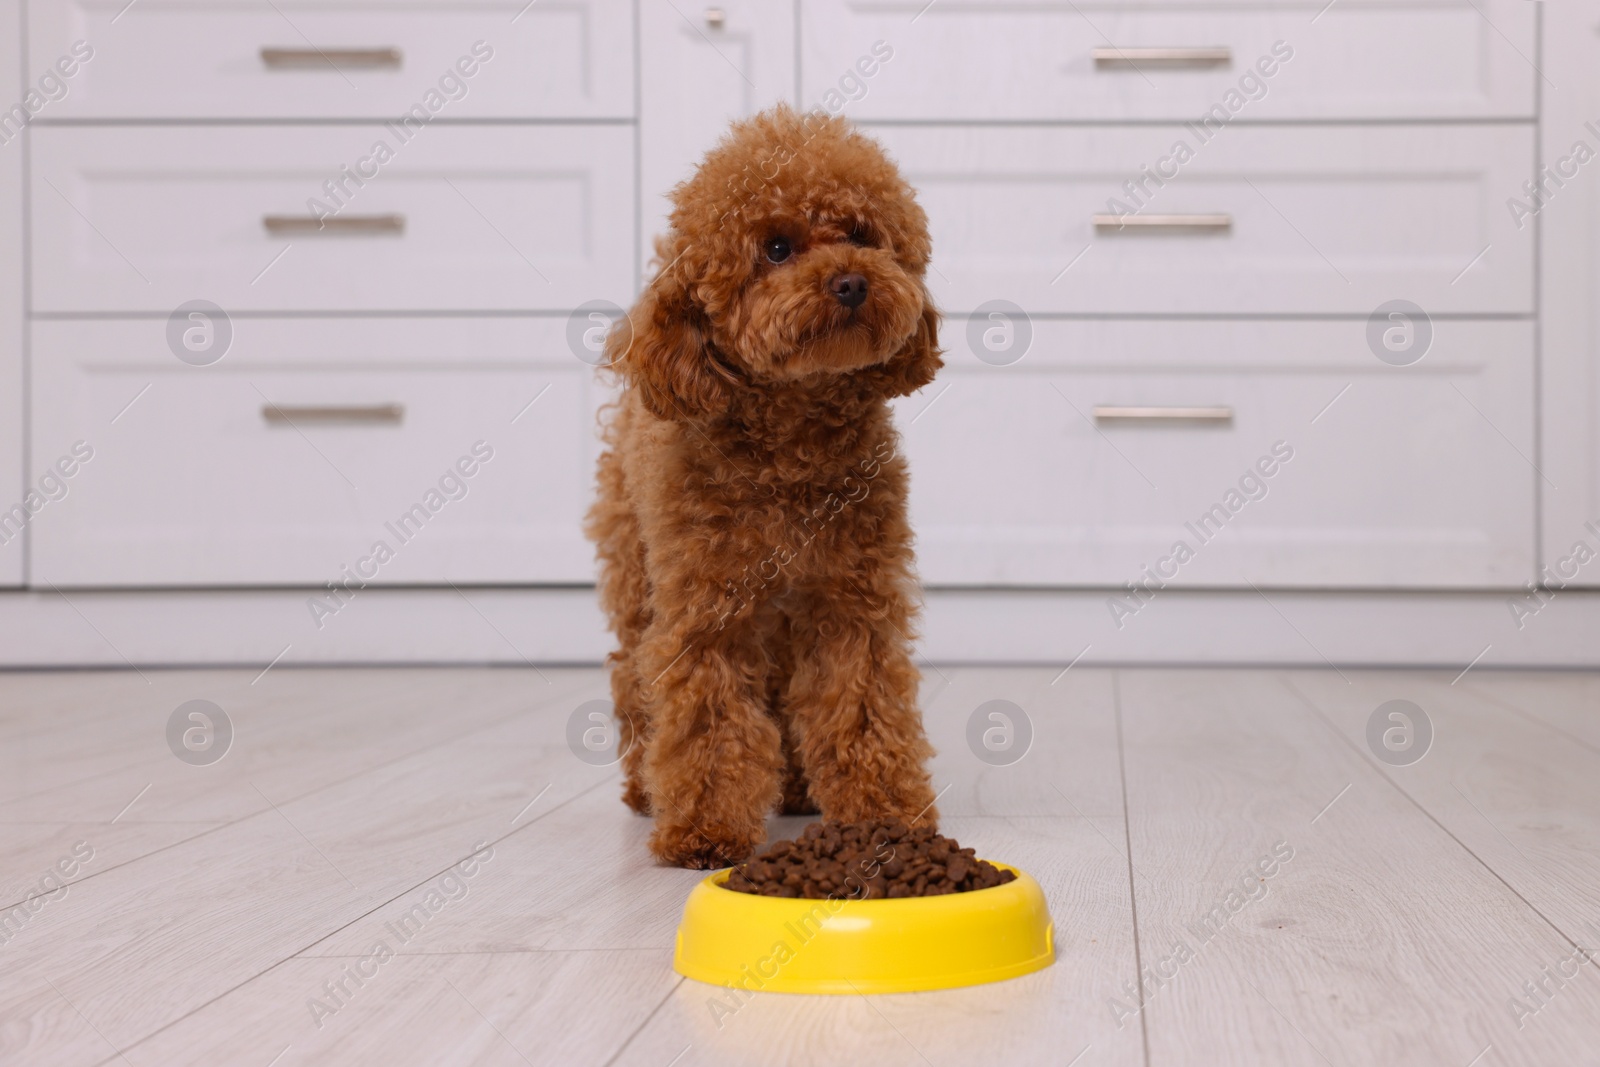 Photo of Cute Maltipoo dog near feeding bowl with dry food on floor indoors. Lovely pet